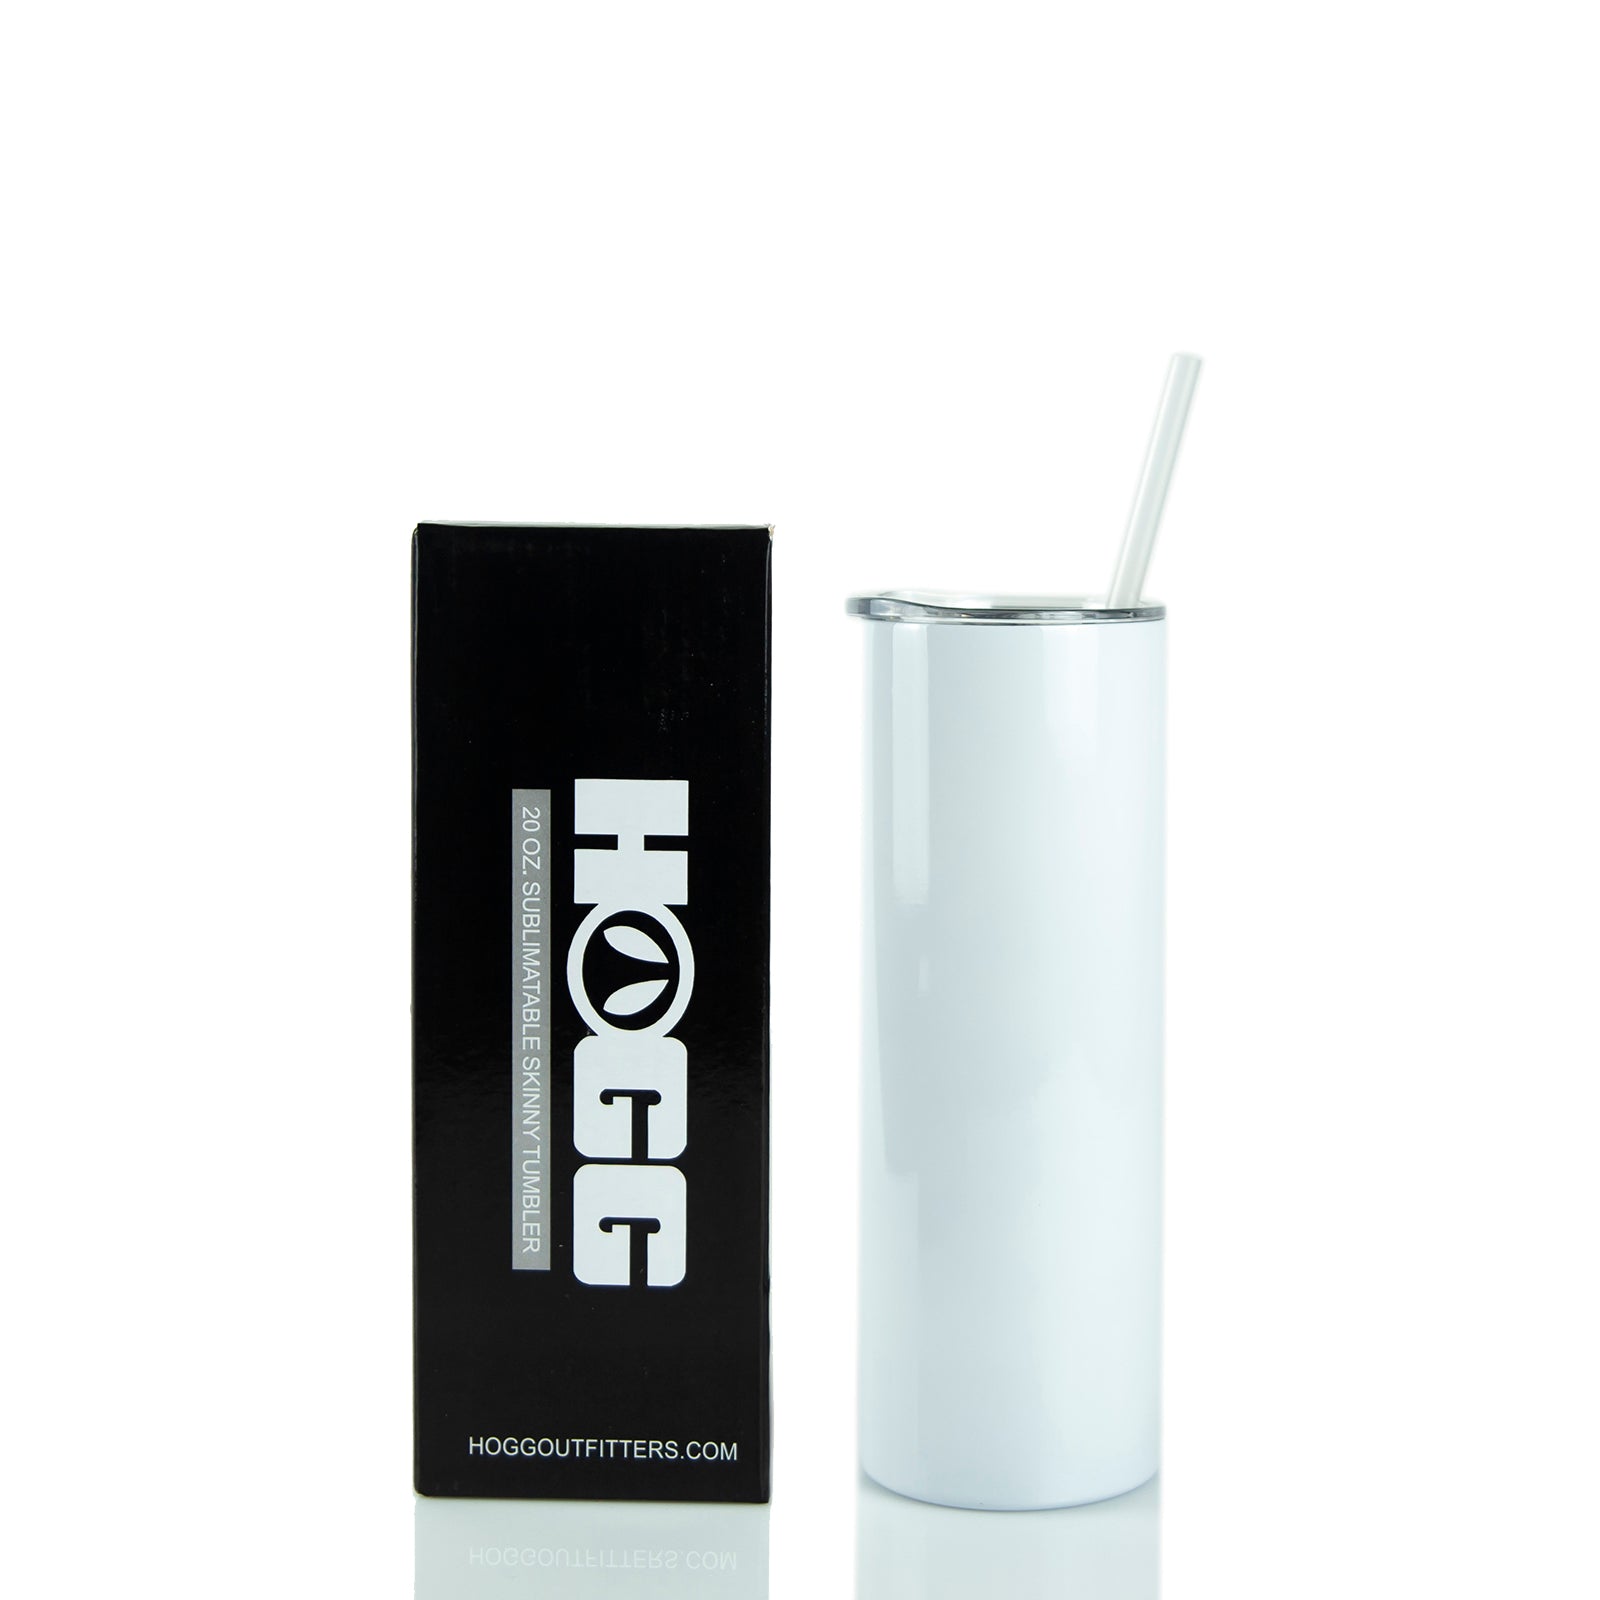 TopCup 20oz Tumbler Accessories Flip Lid, Straws & Carrying Case Set For  Skinny Tumblers Wholesale From Zw_network, $0.18